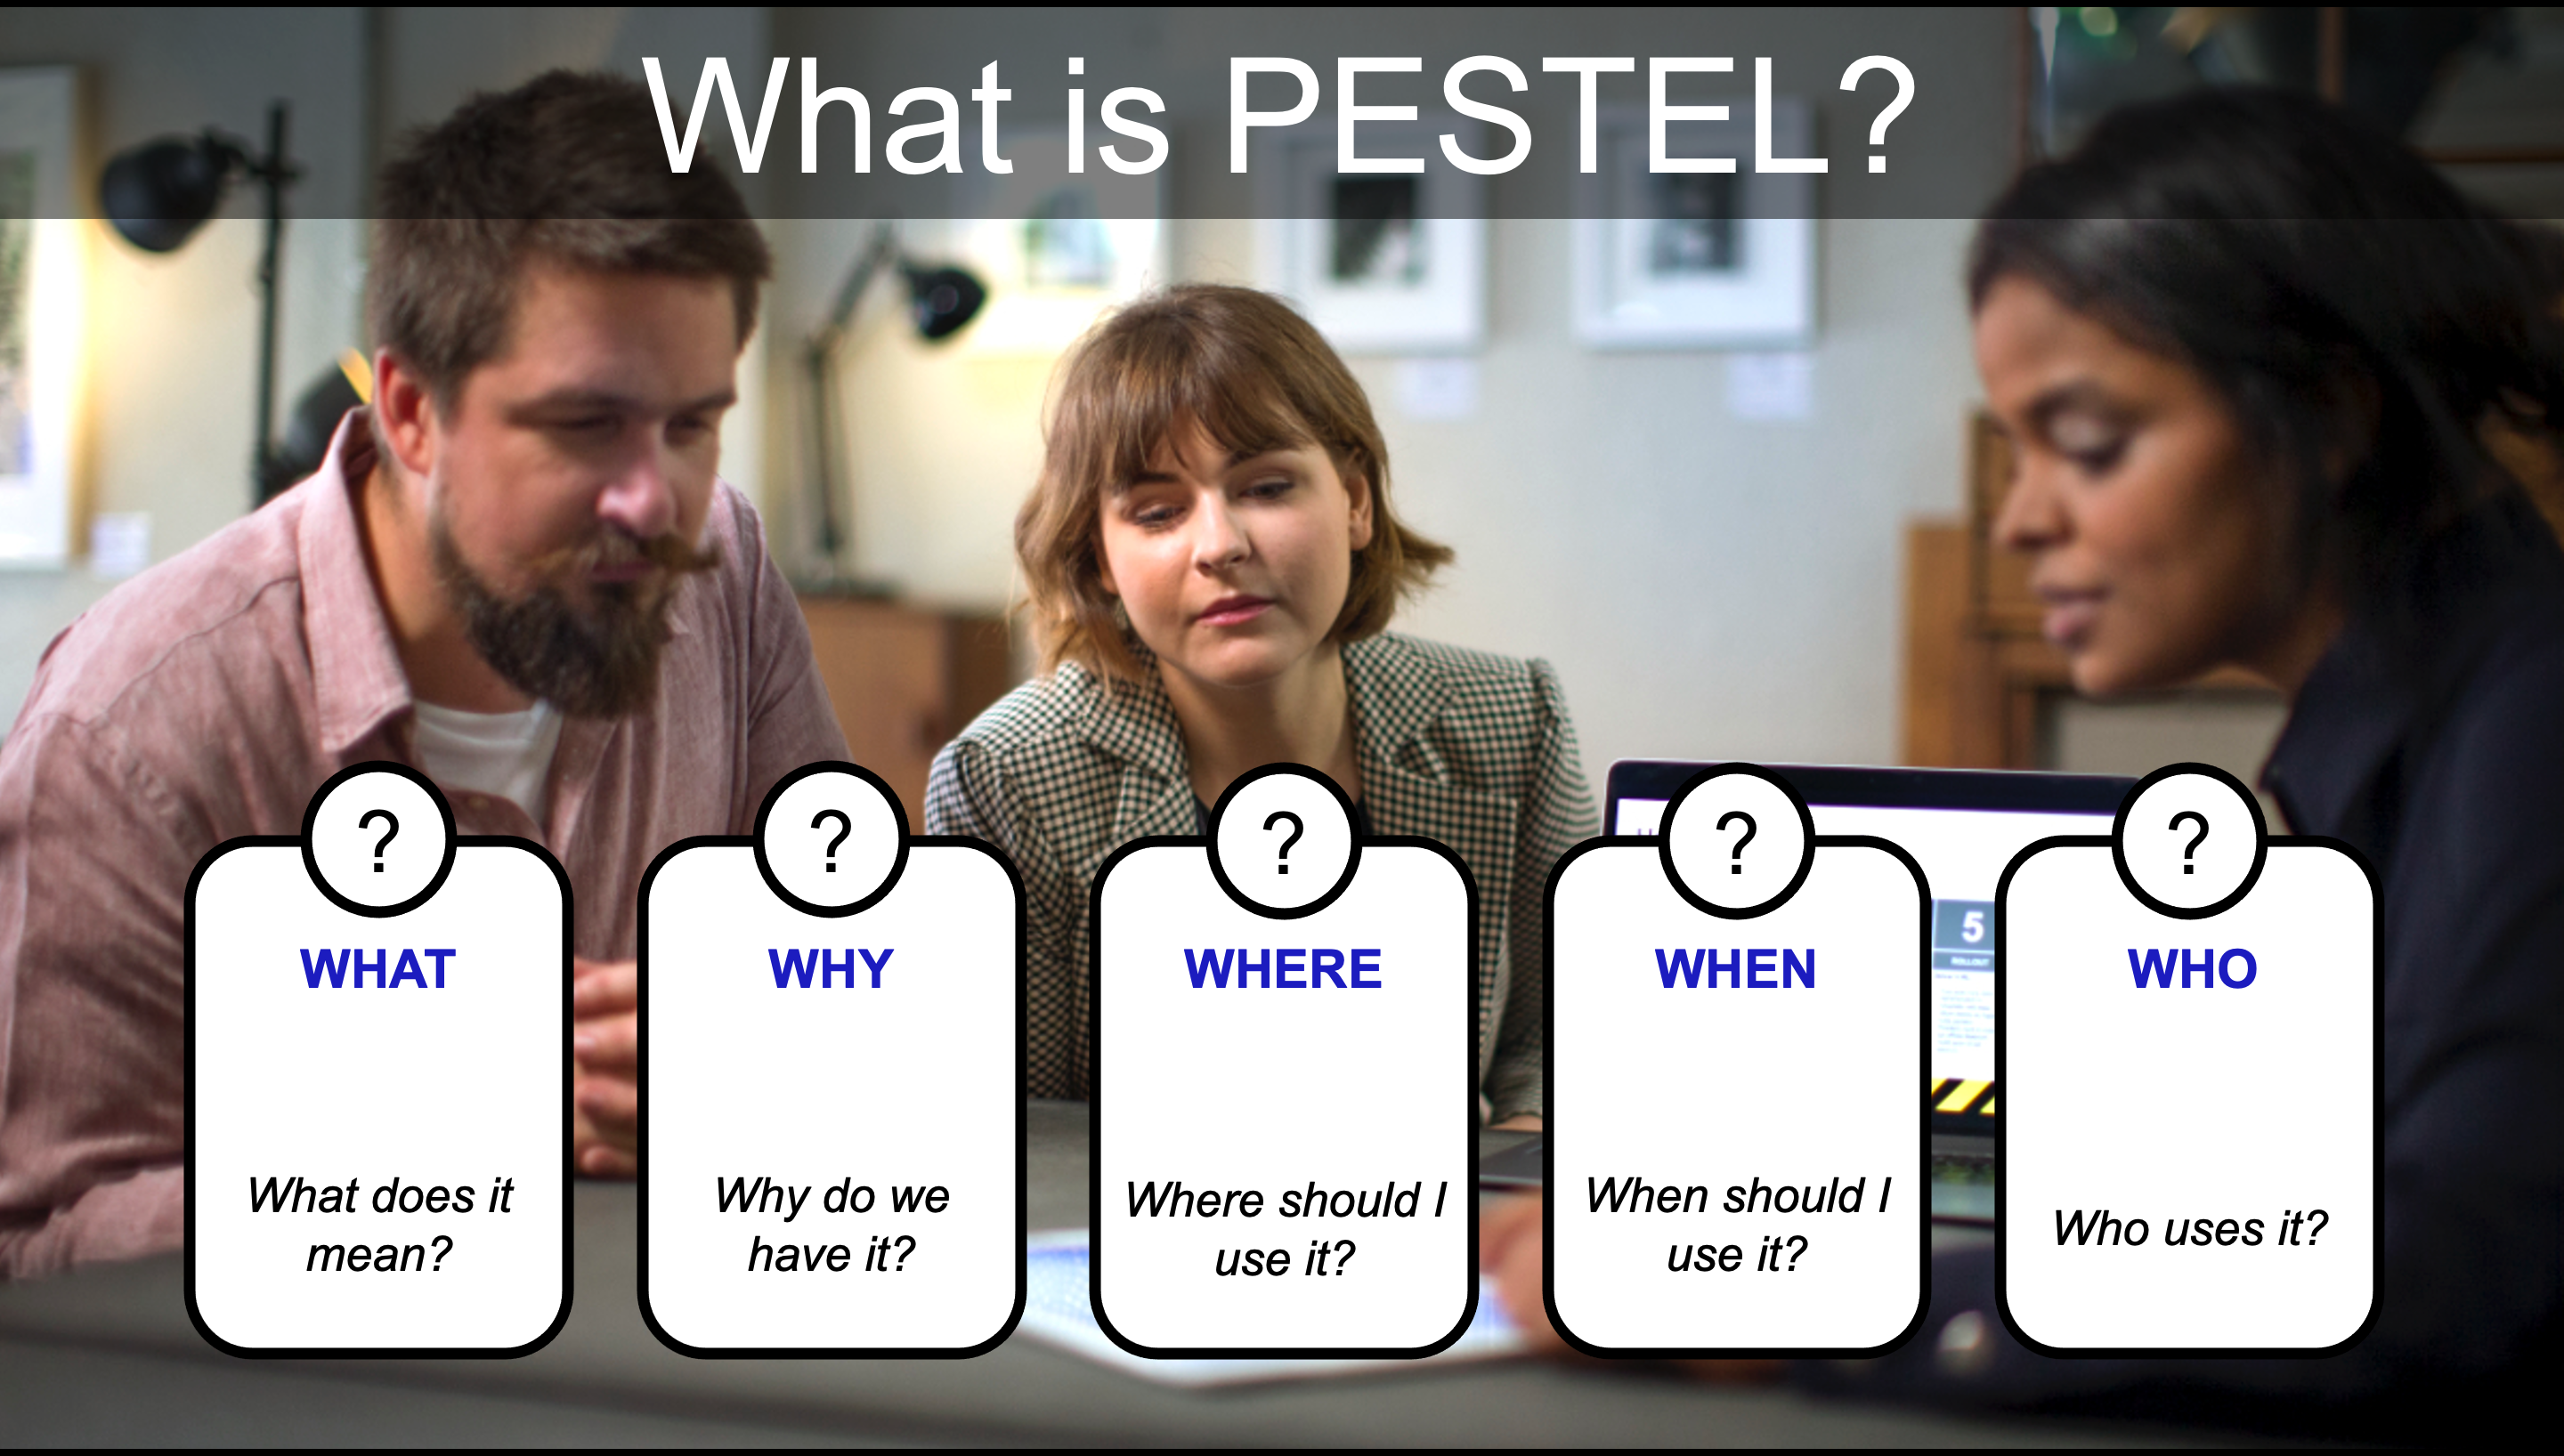 What is PESTEL?